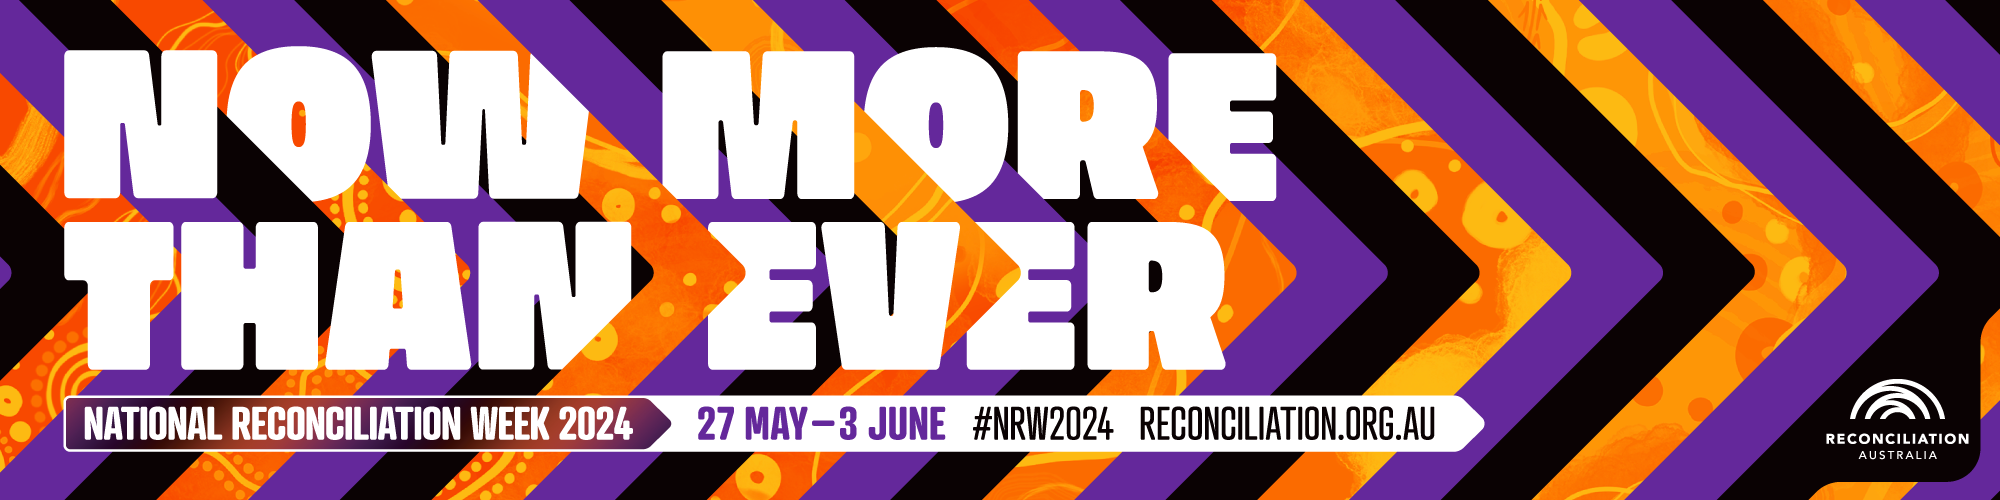 National Reconciliation Week 2023 from 27 May to 3 June. The theme is Be a voice for generations.